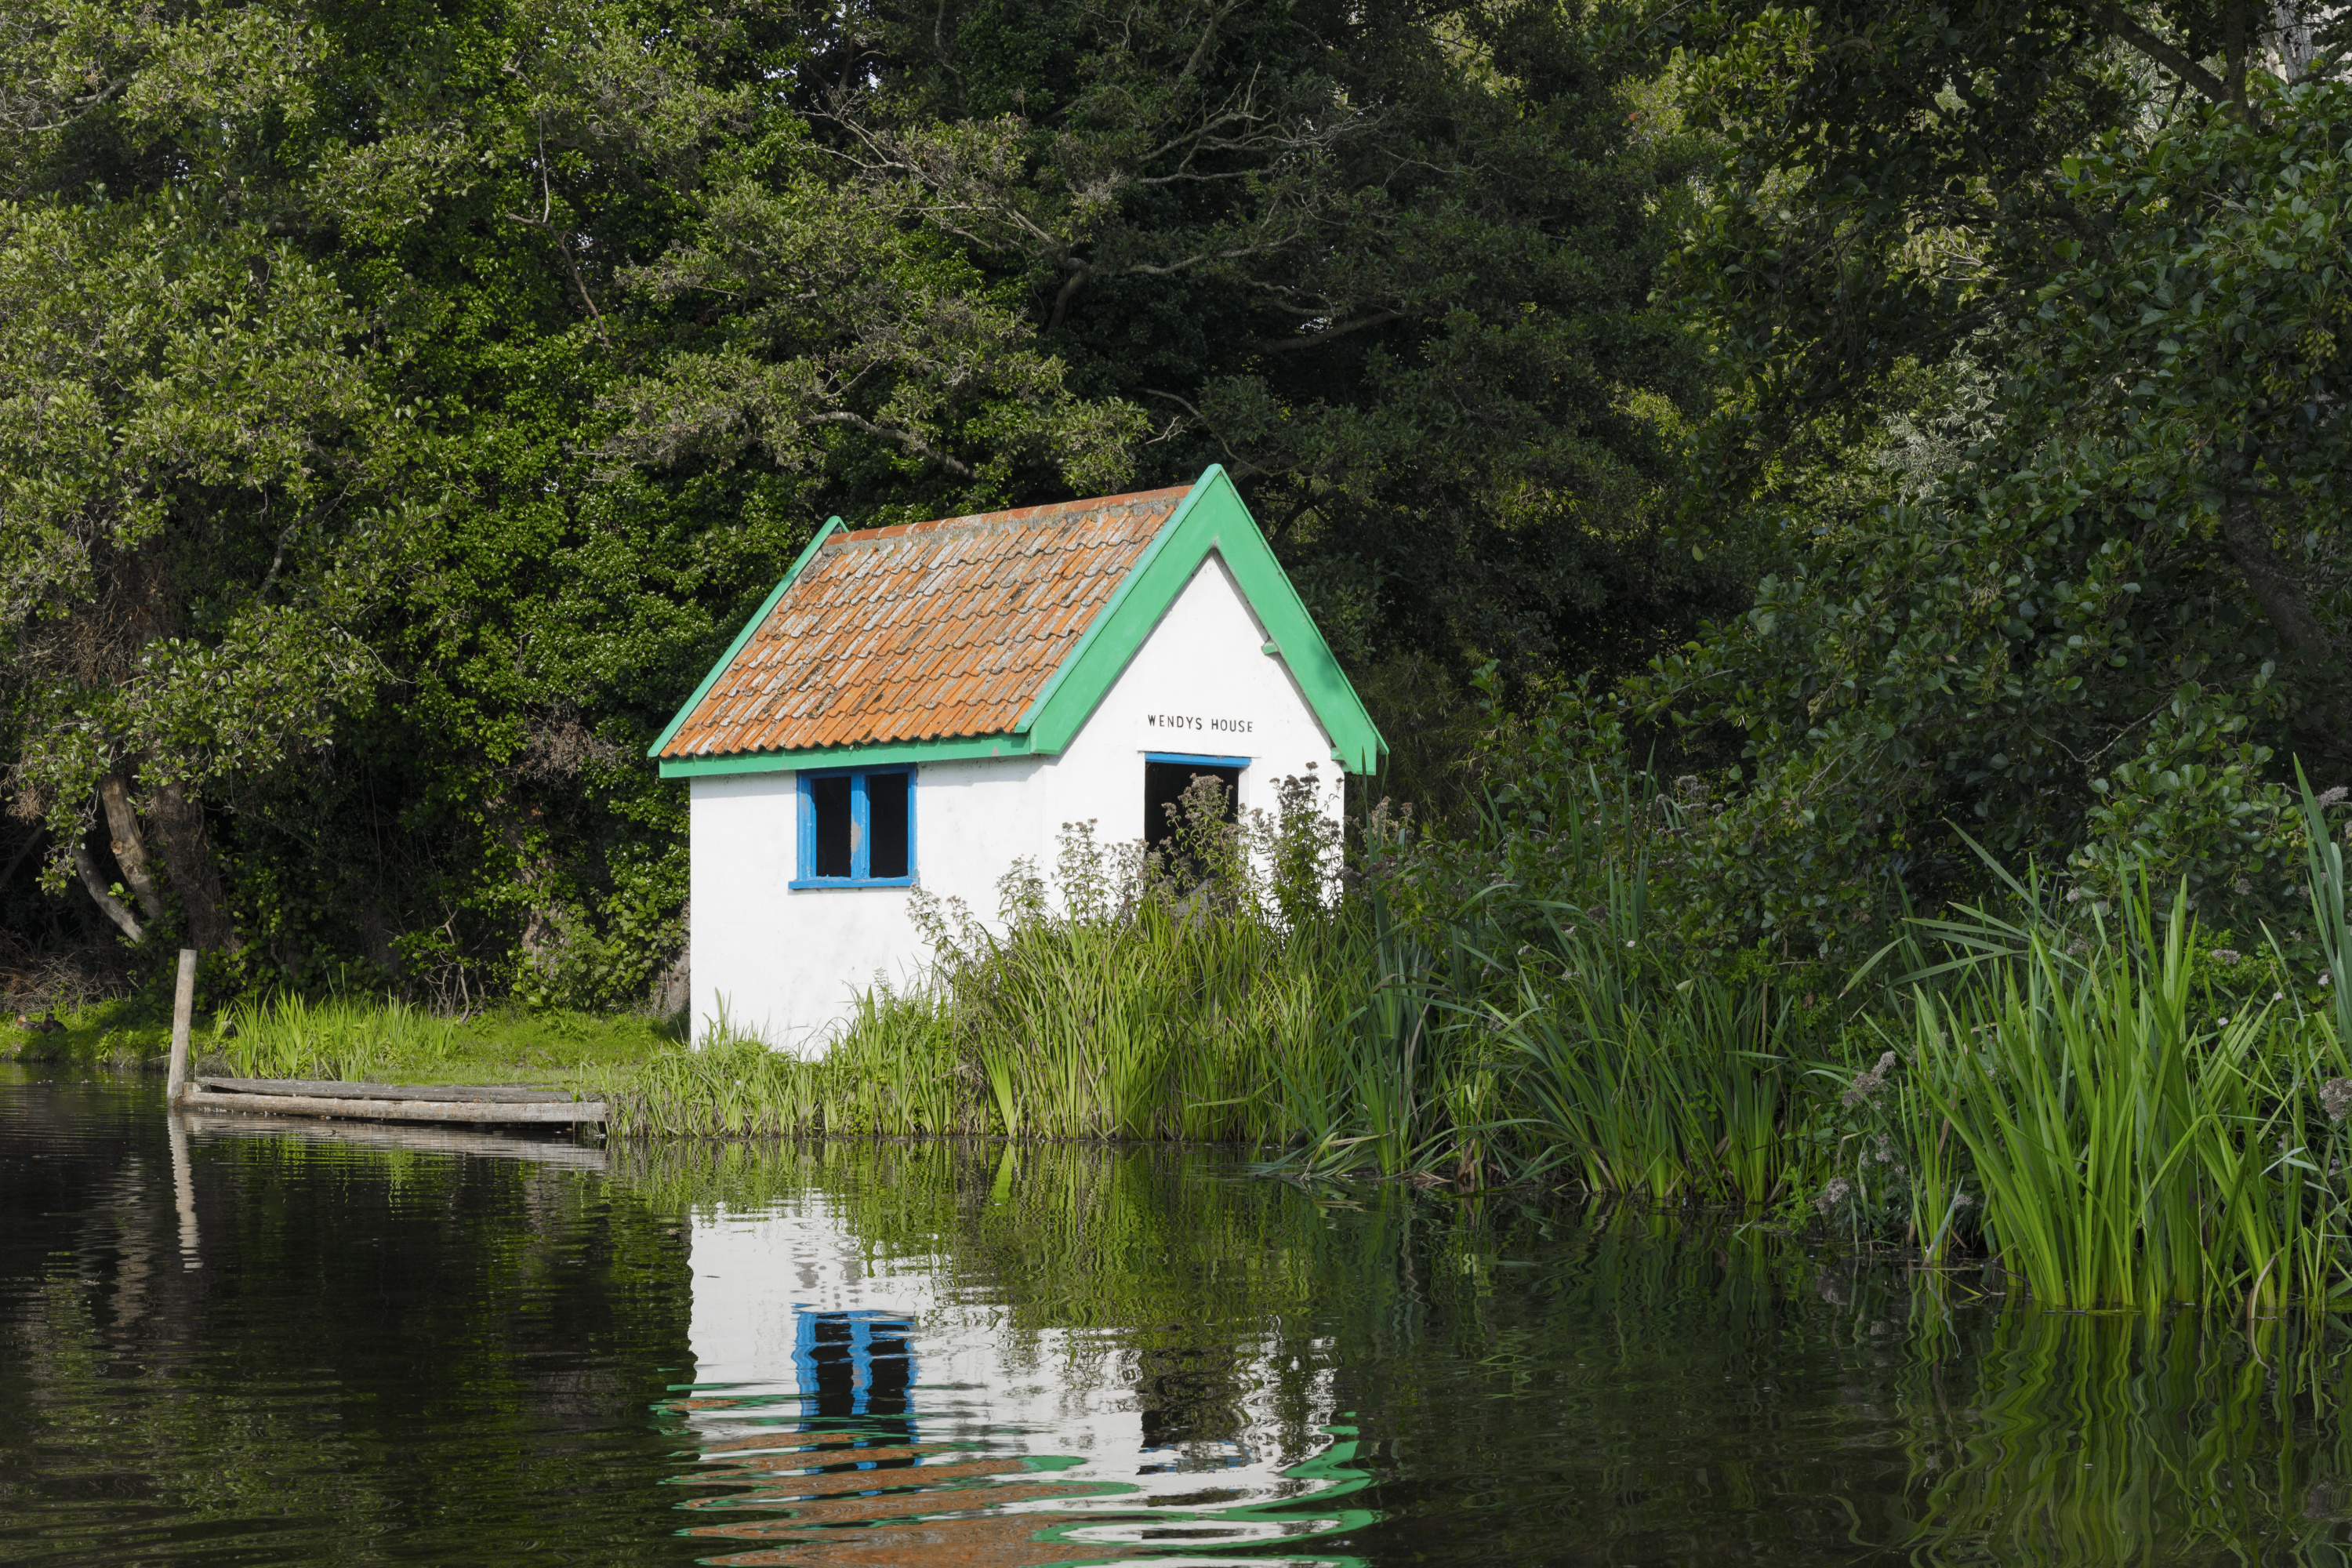 The Peter Pan-inspired Wendy's House at Thorpeness Meare in Suffolk. (Historic England Archive/ PA)